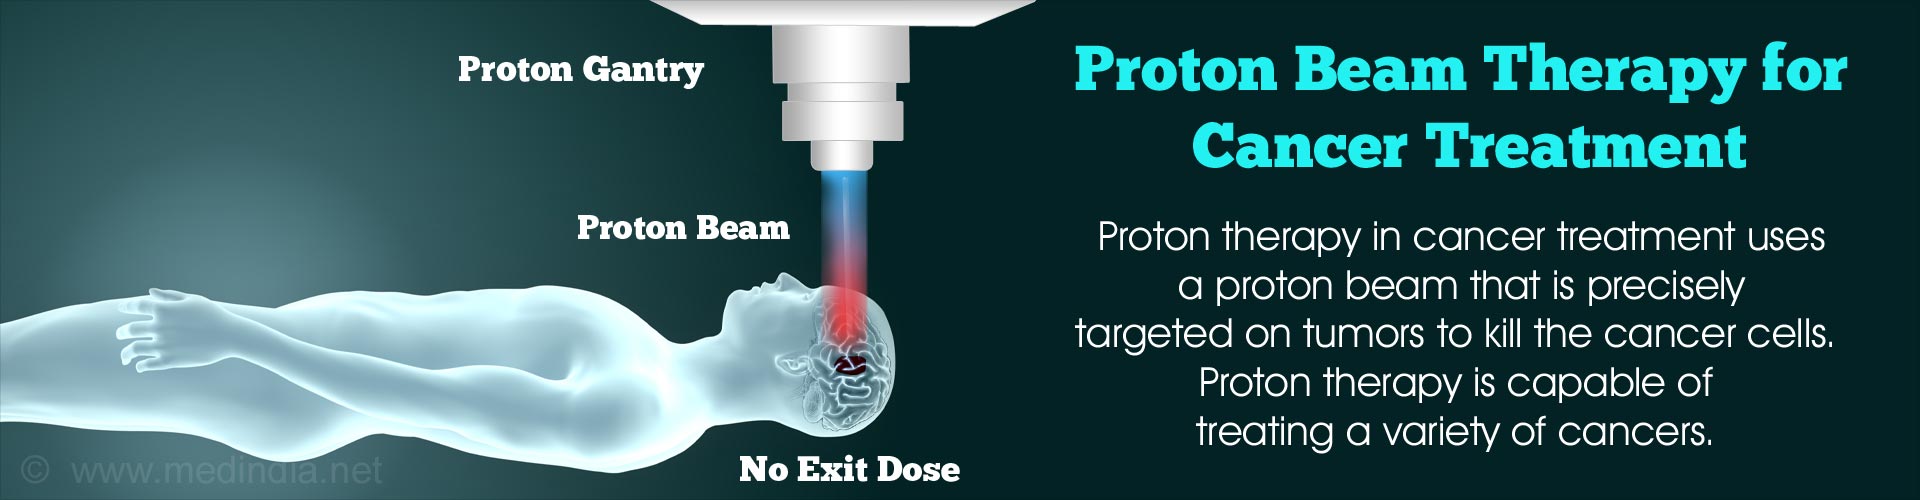 Prostate Cancer Proton Beam Therapy 1171